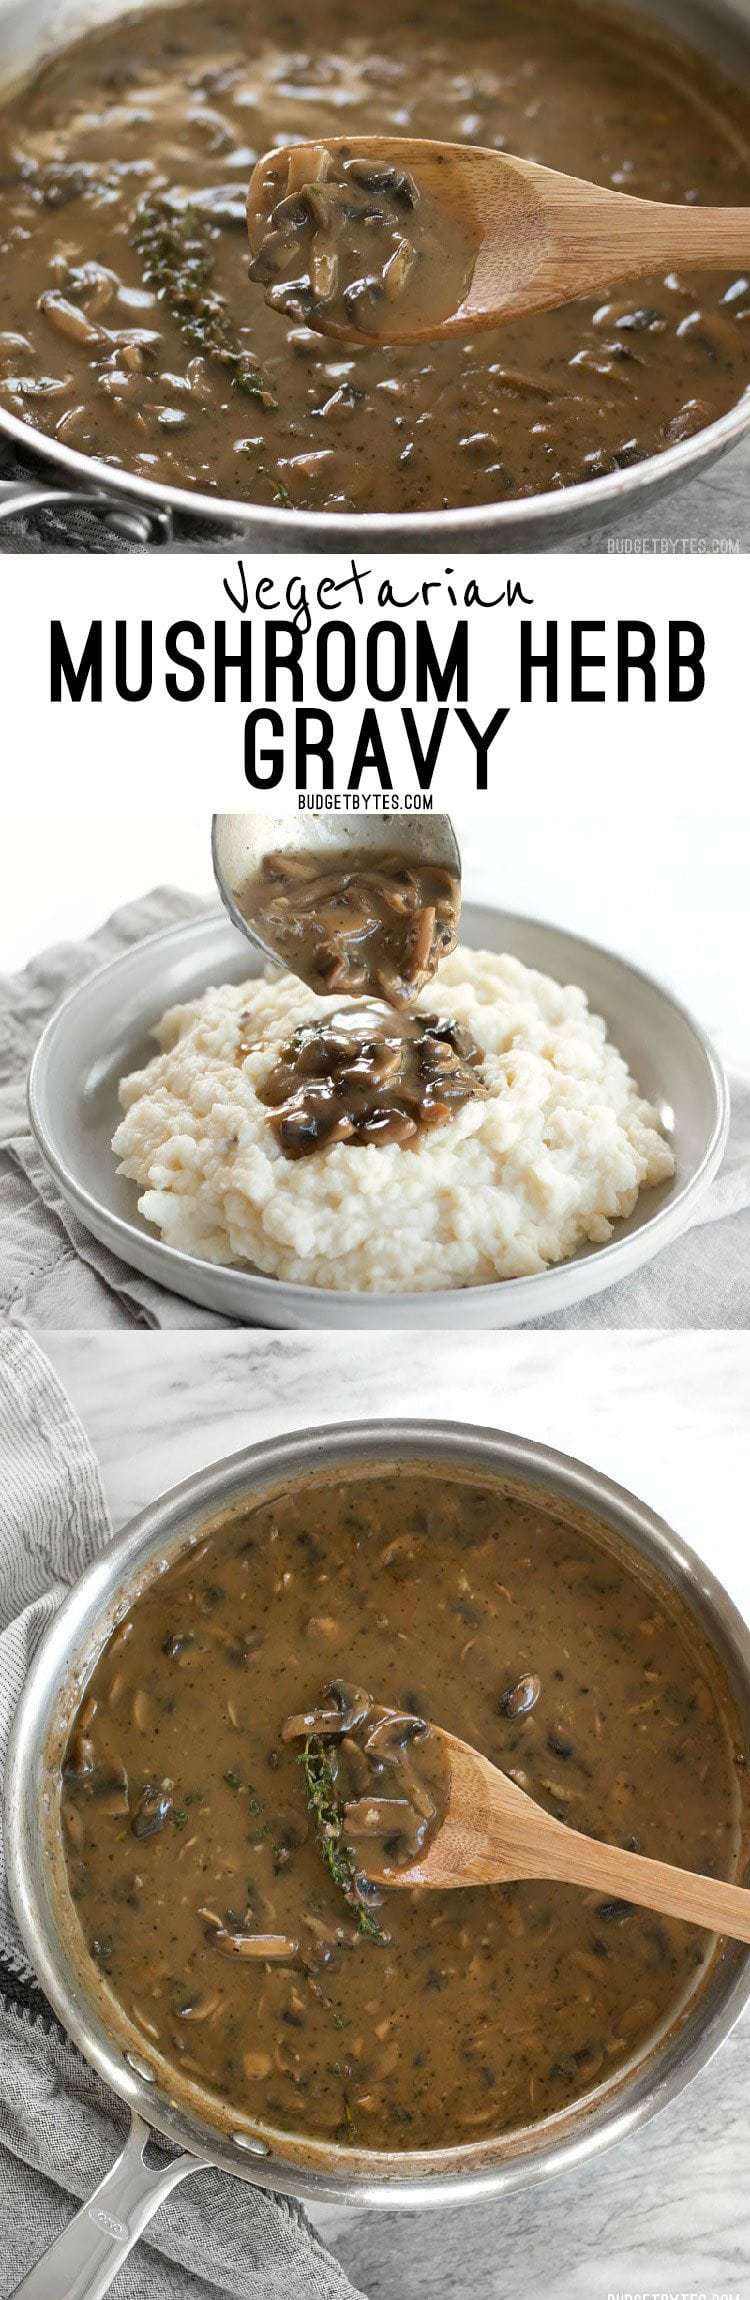 Collage of images of mushroom herb gravy with title text in the center.